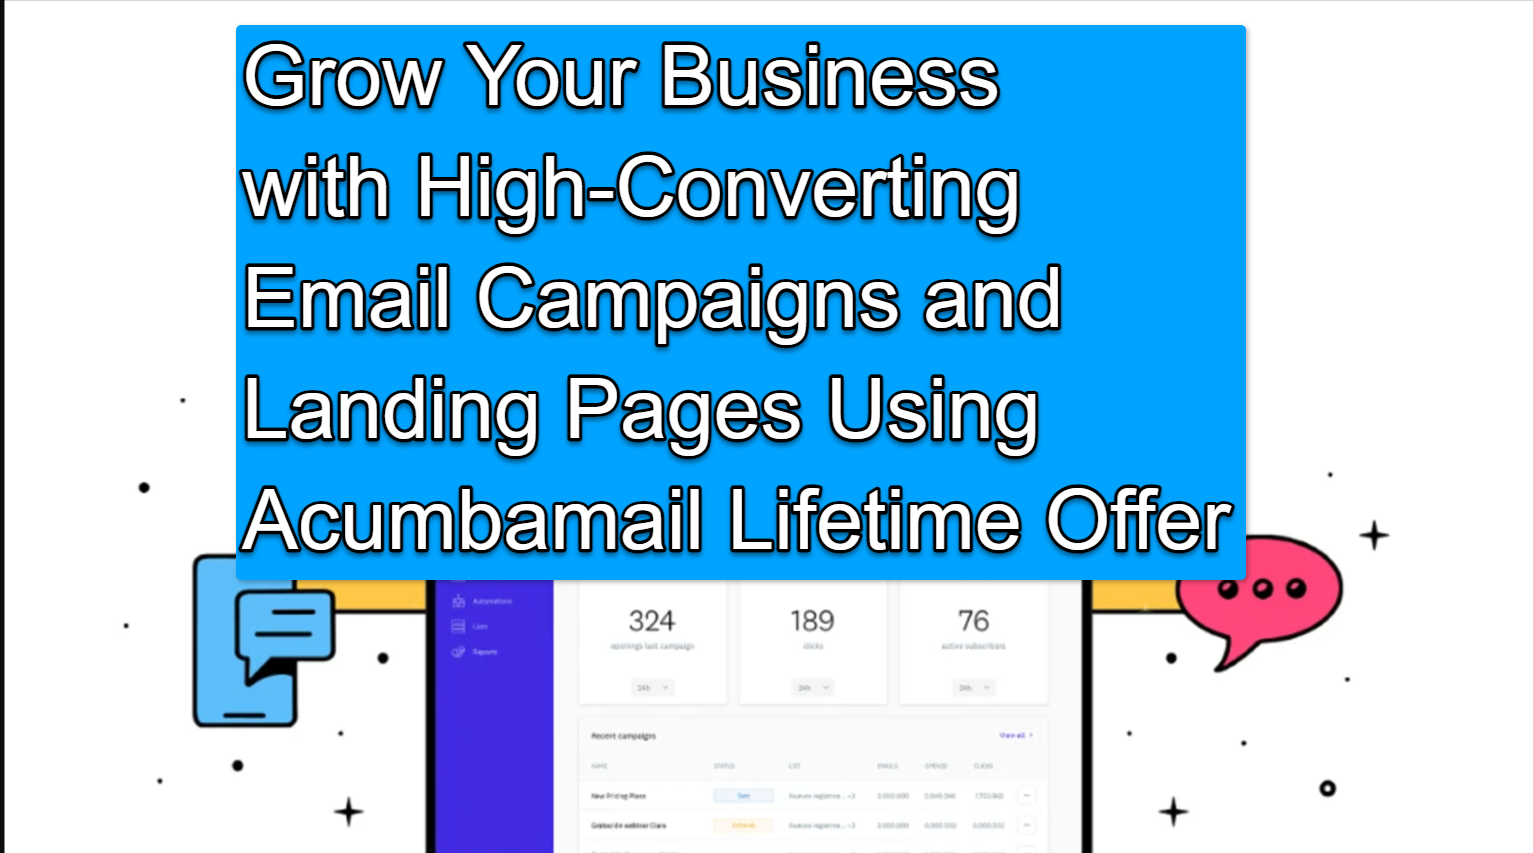 Grow Your Business with High Converting Email Campaigns and Landing Pages Using Acumbamail Lifetime Offer Grow Your Business with High-Converting Email Campaigns and Landing Pages Using Acumbamail Lifetime Offer